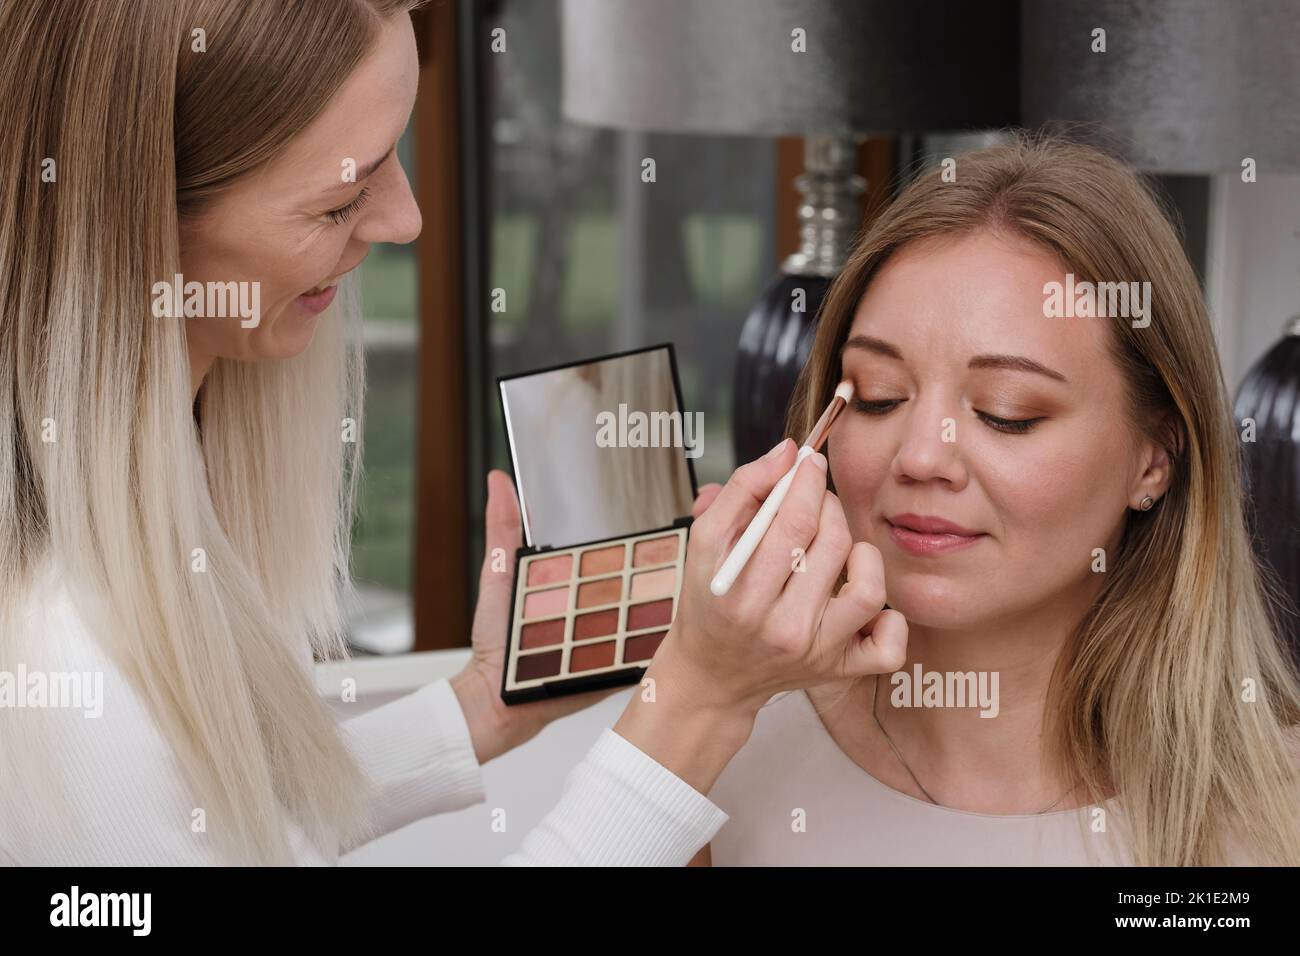 Artist with palette doing nude eye make-up in beauty salon. Woman applying eyeshadow powder. Processional look natural female Stock Photo